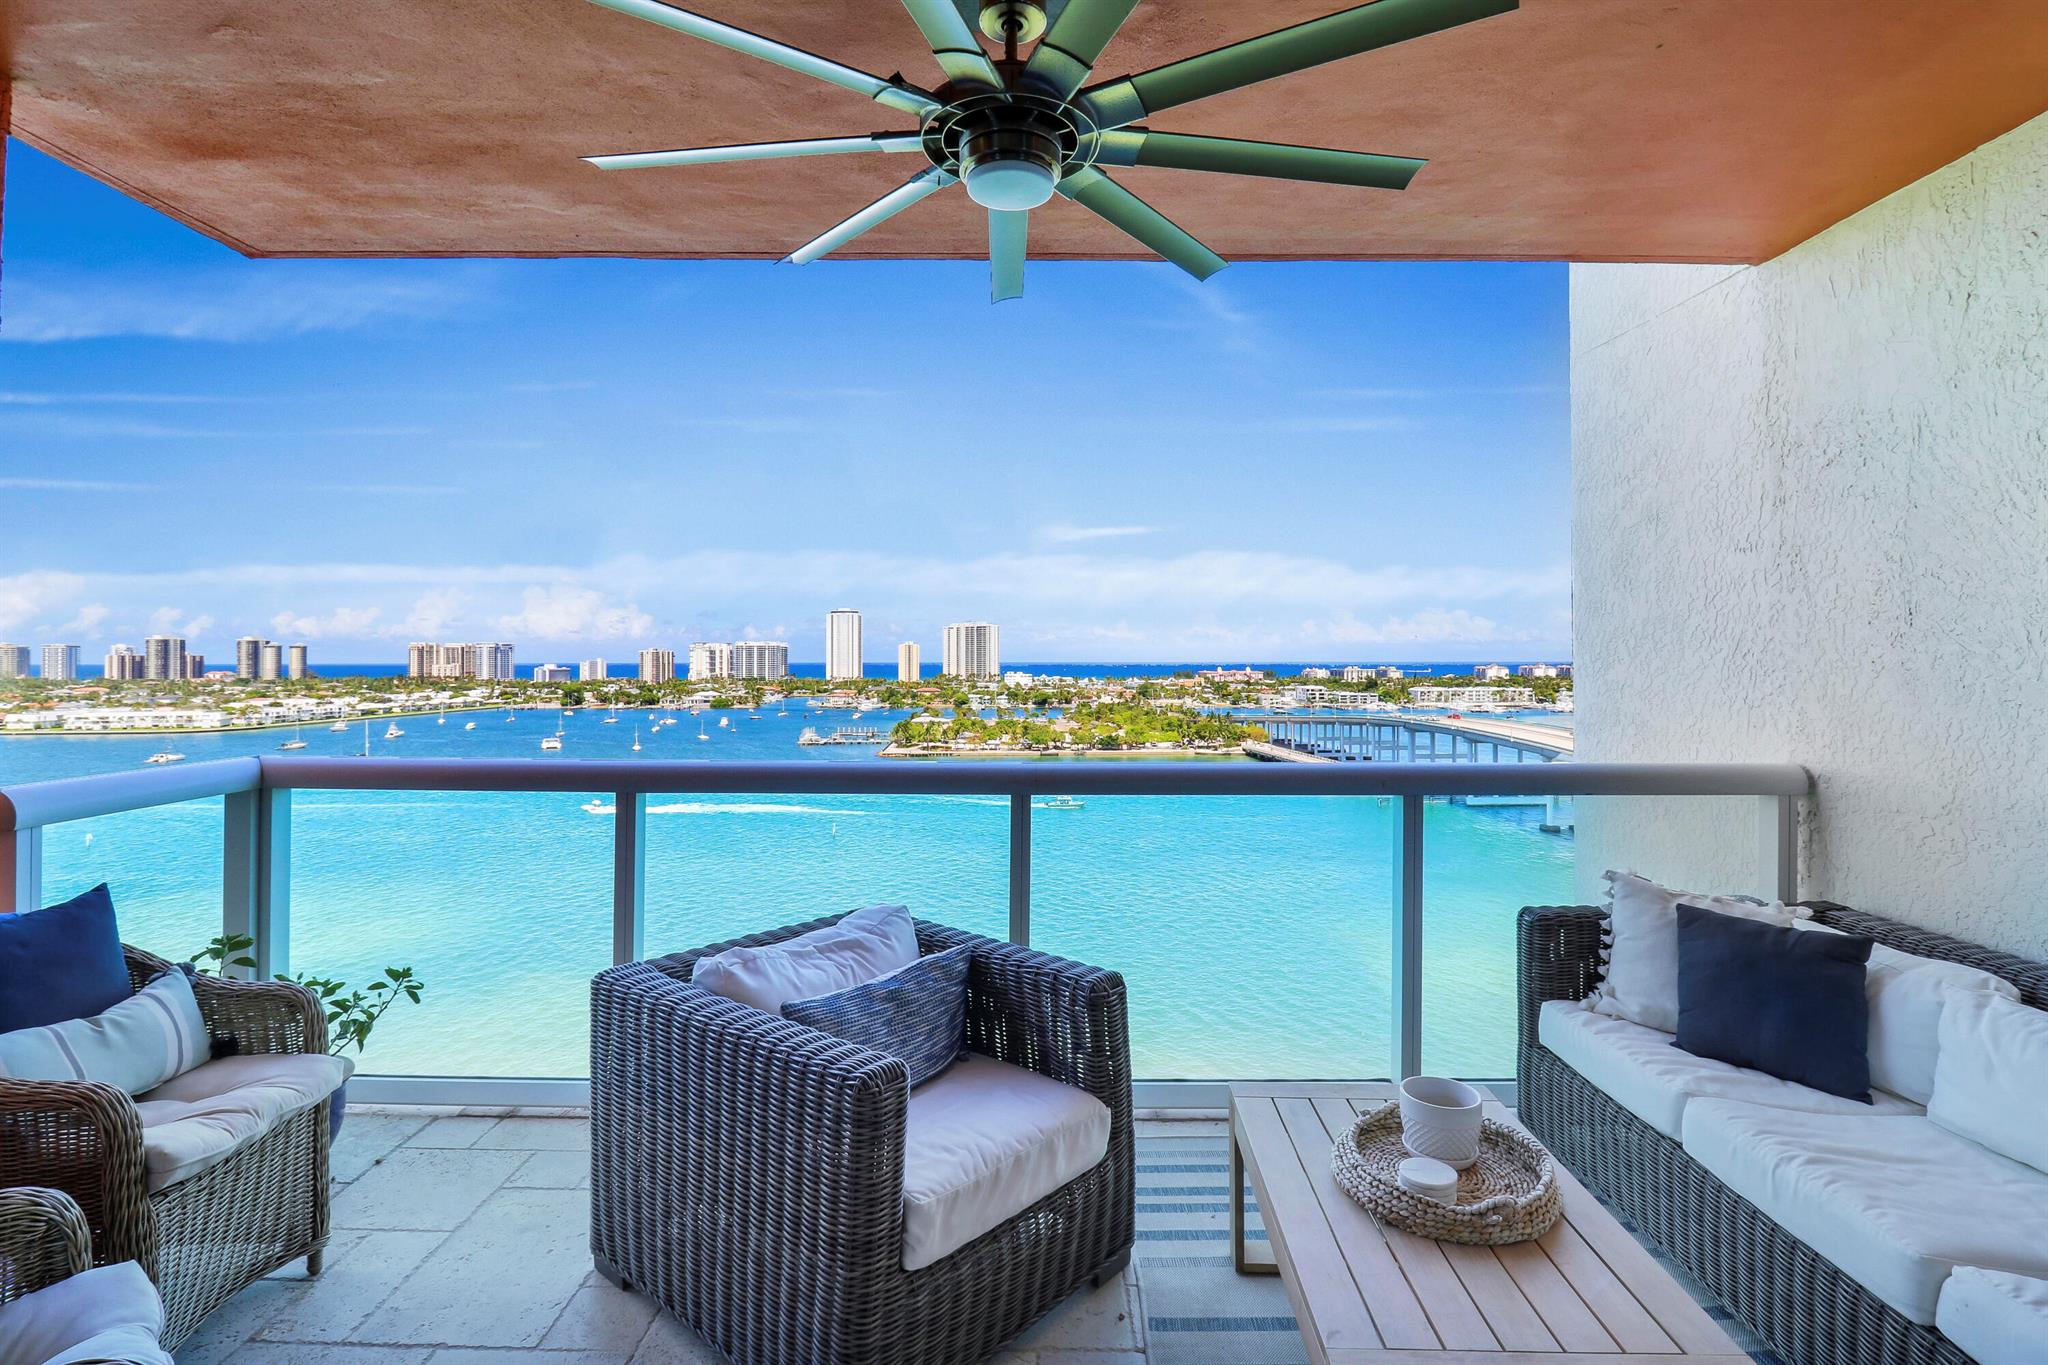 Absolutely stunning 3/3 unit with spectacular direct Intracoastal / Ocean views from your private balcony on the 15th floor. This beautiful condo has been meticulously maintained and features a spacious kitchen with an open floorplan, large master bedroom with direct views walk-in closets and large guest rooms. Marina Grande is centrally located w/ resort style amenities, including garage parking, heated pool, jacuzzi, tennis & pickleball, bbq grills, community room, valet parking, fitness center and a full-service marina for you boaters. Schedule your private showing today.